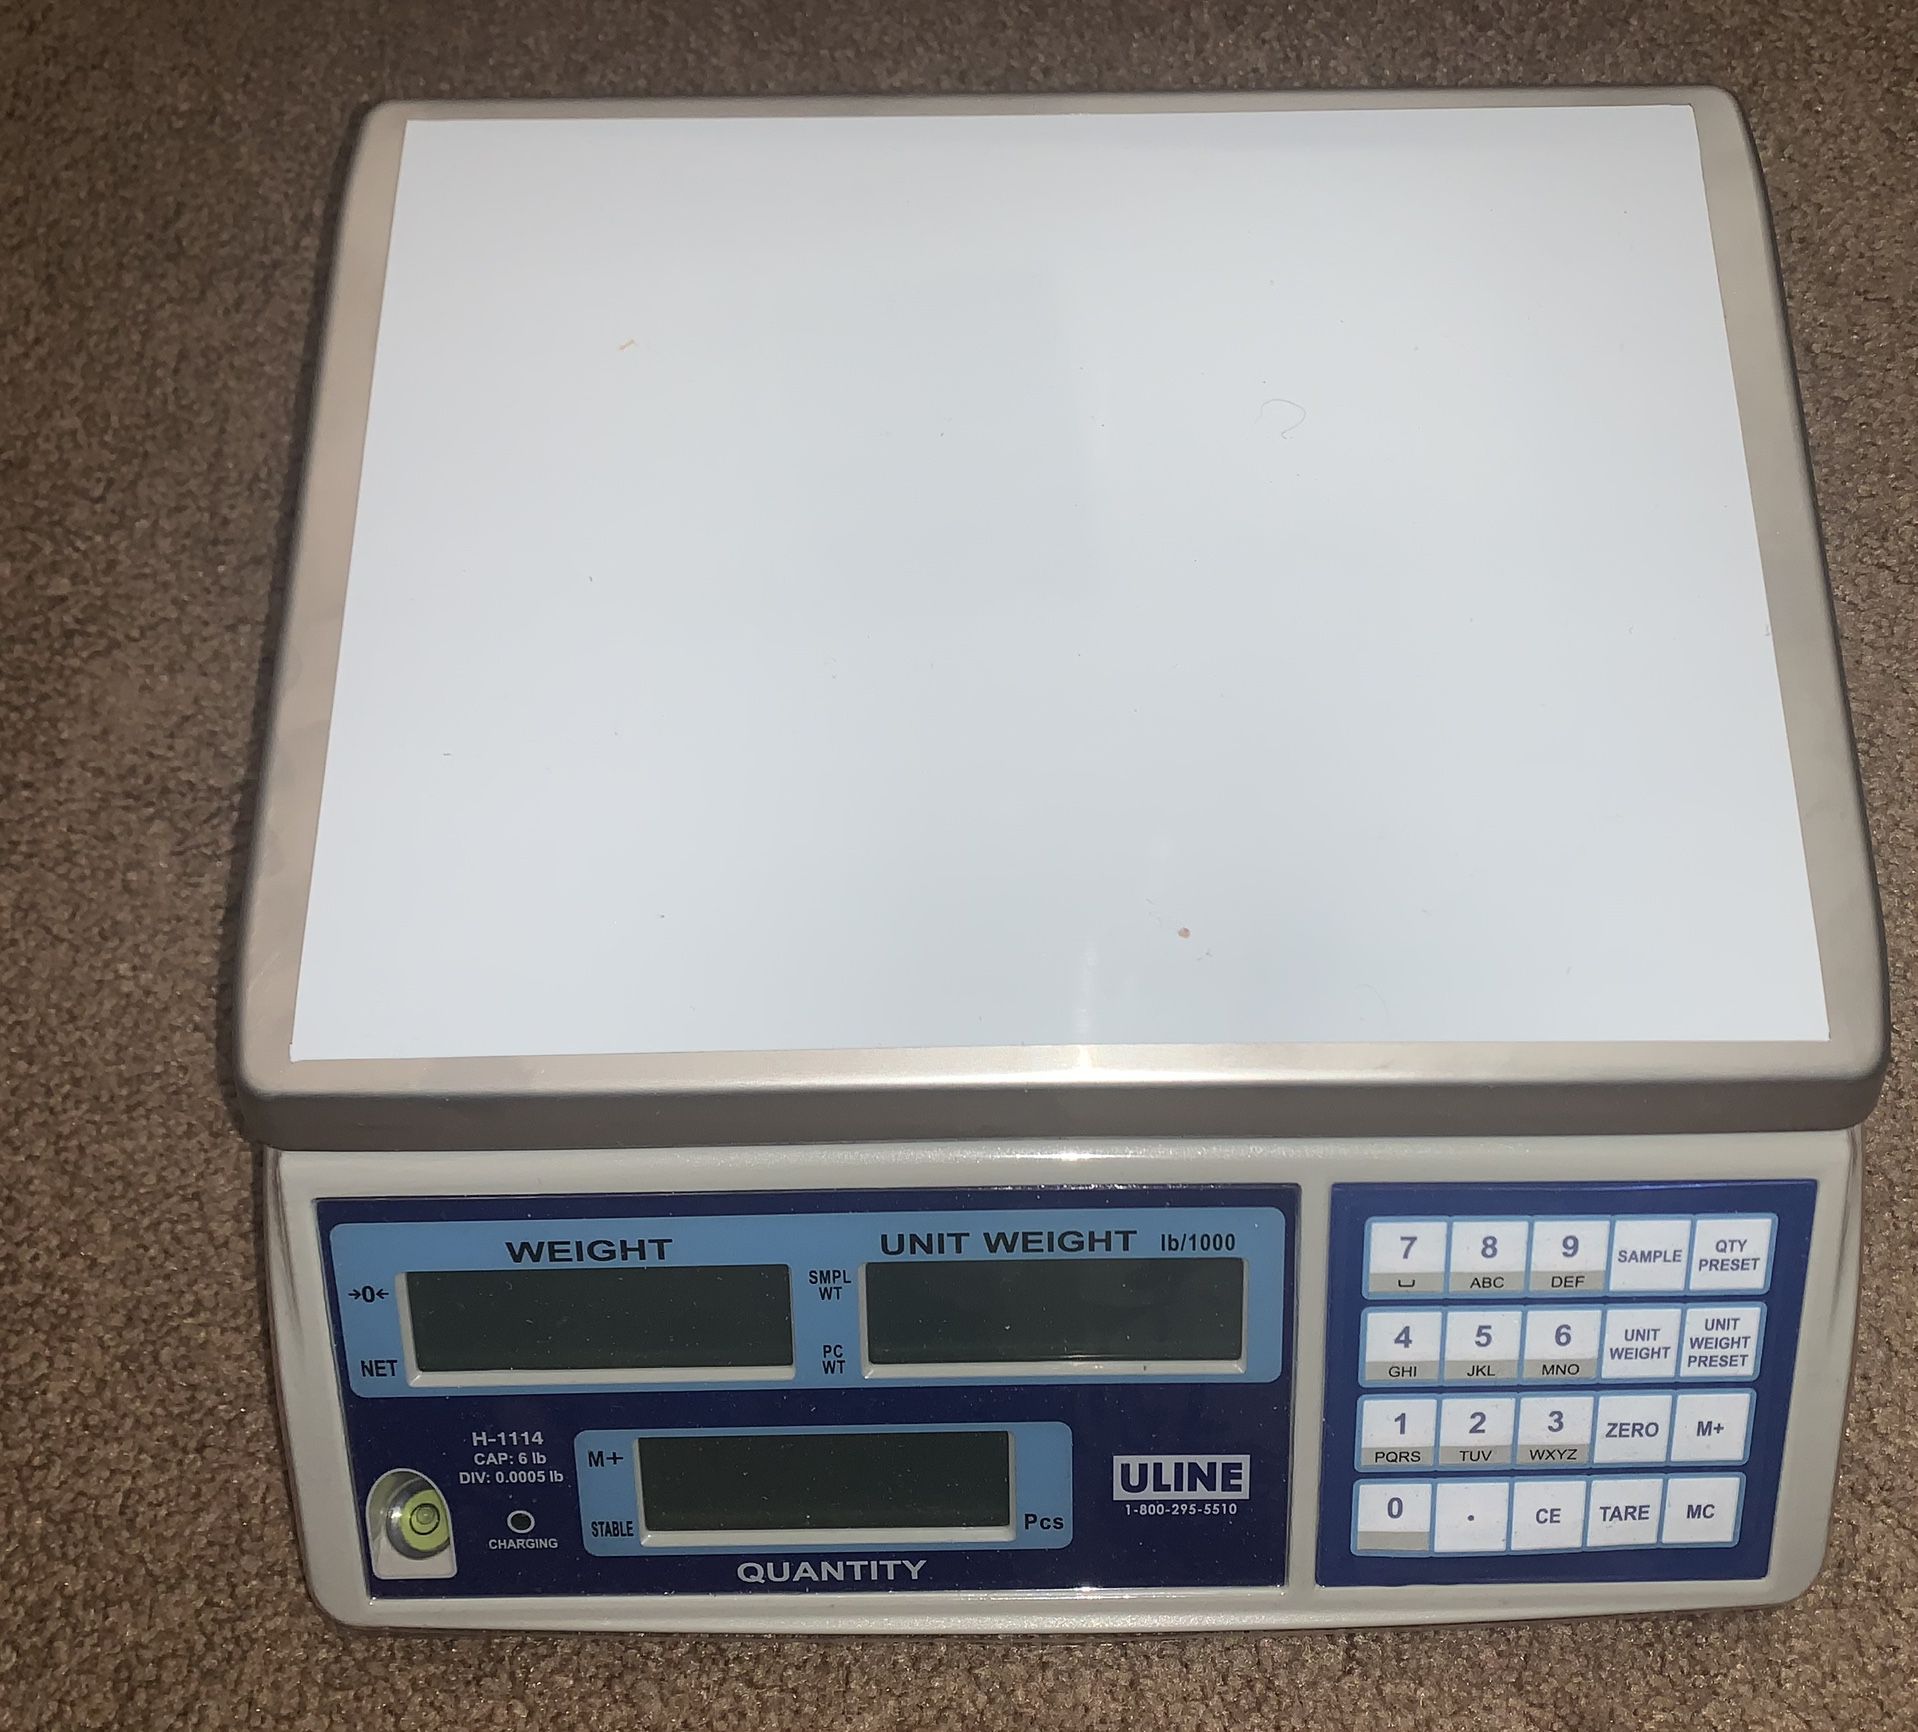 Weighing Scales, Weight Scales, Mail Scales in Stock - ULINE - Uline